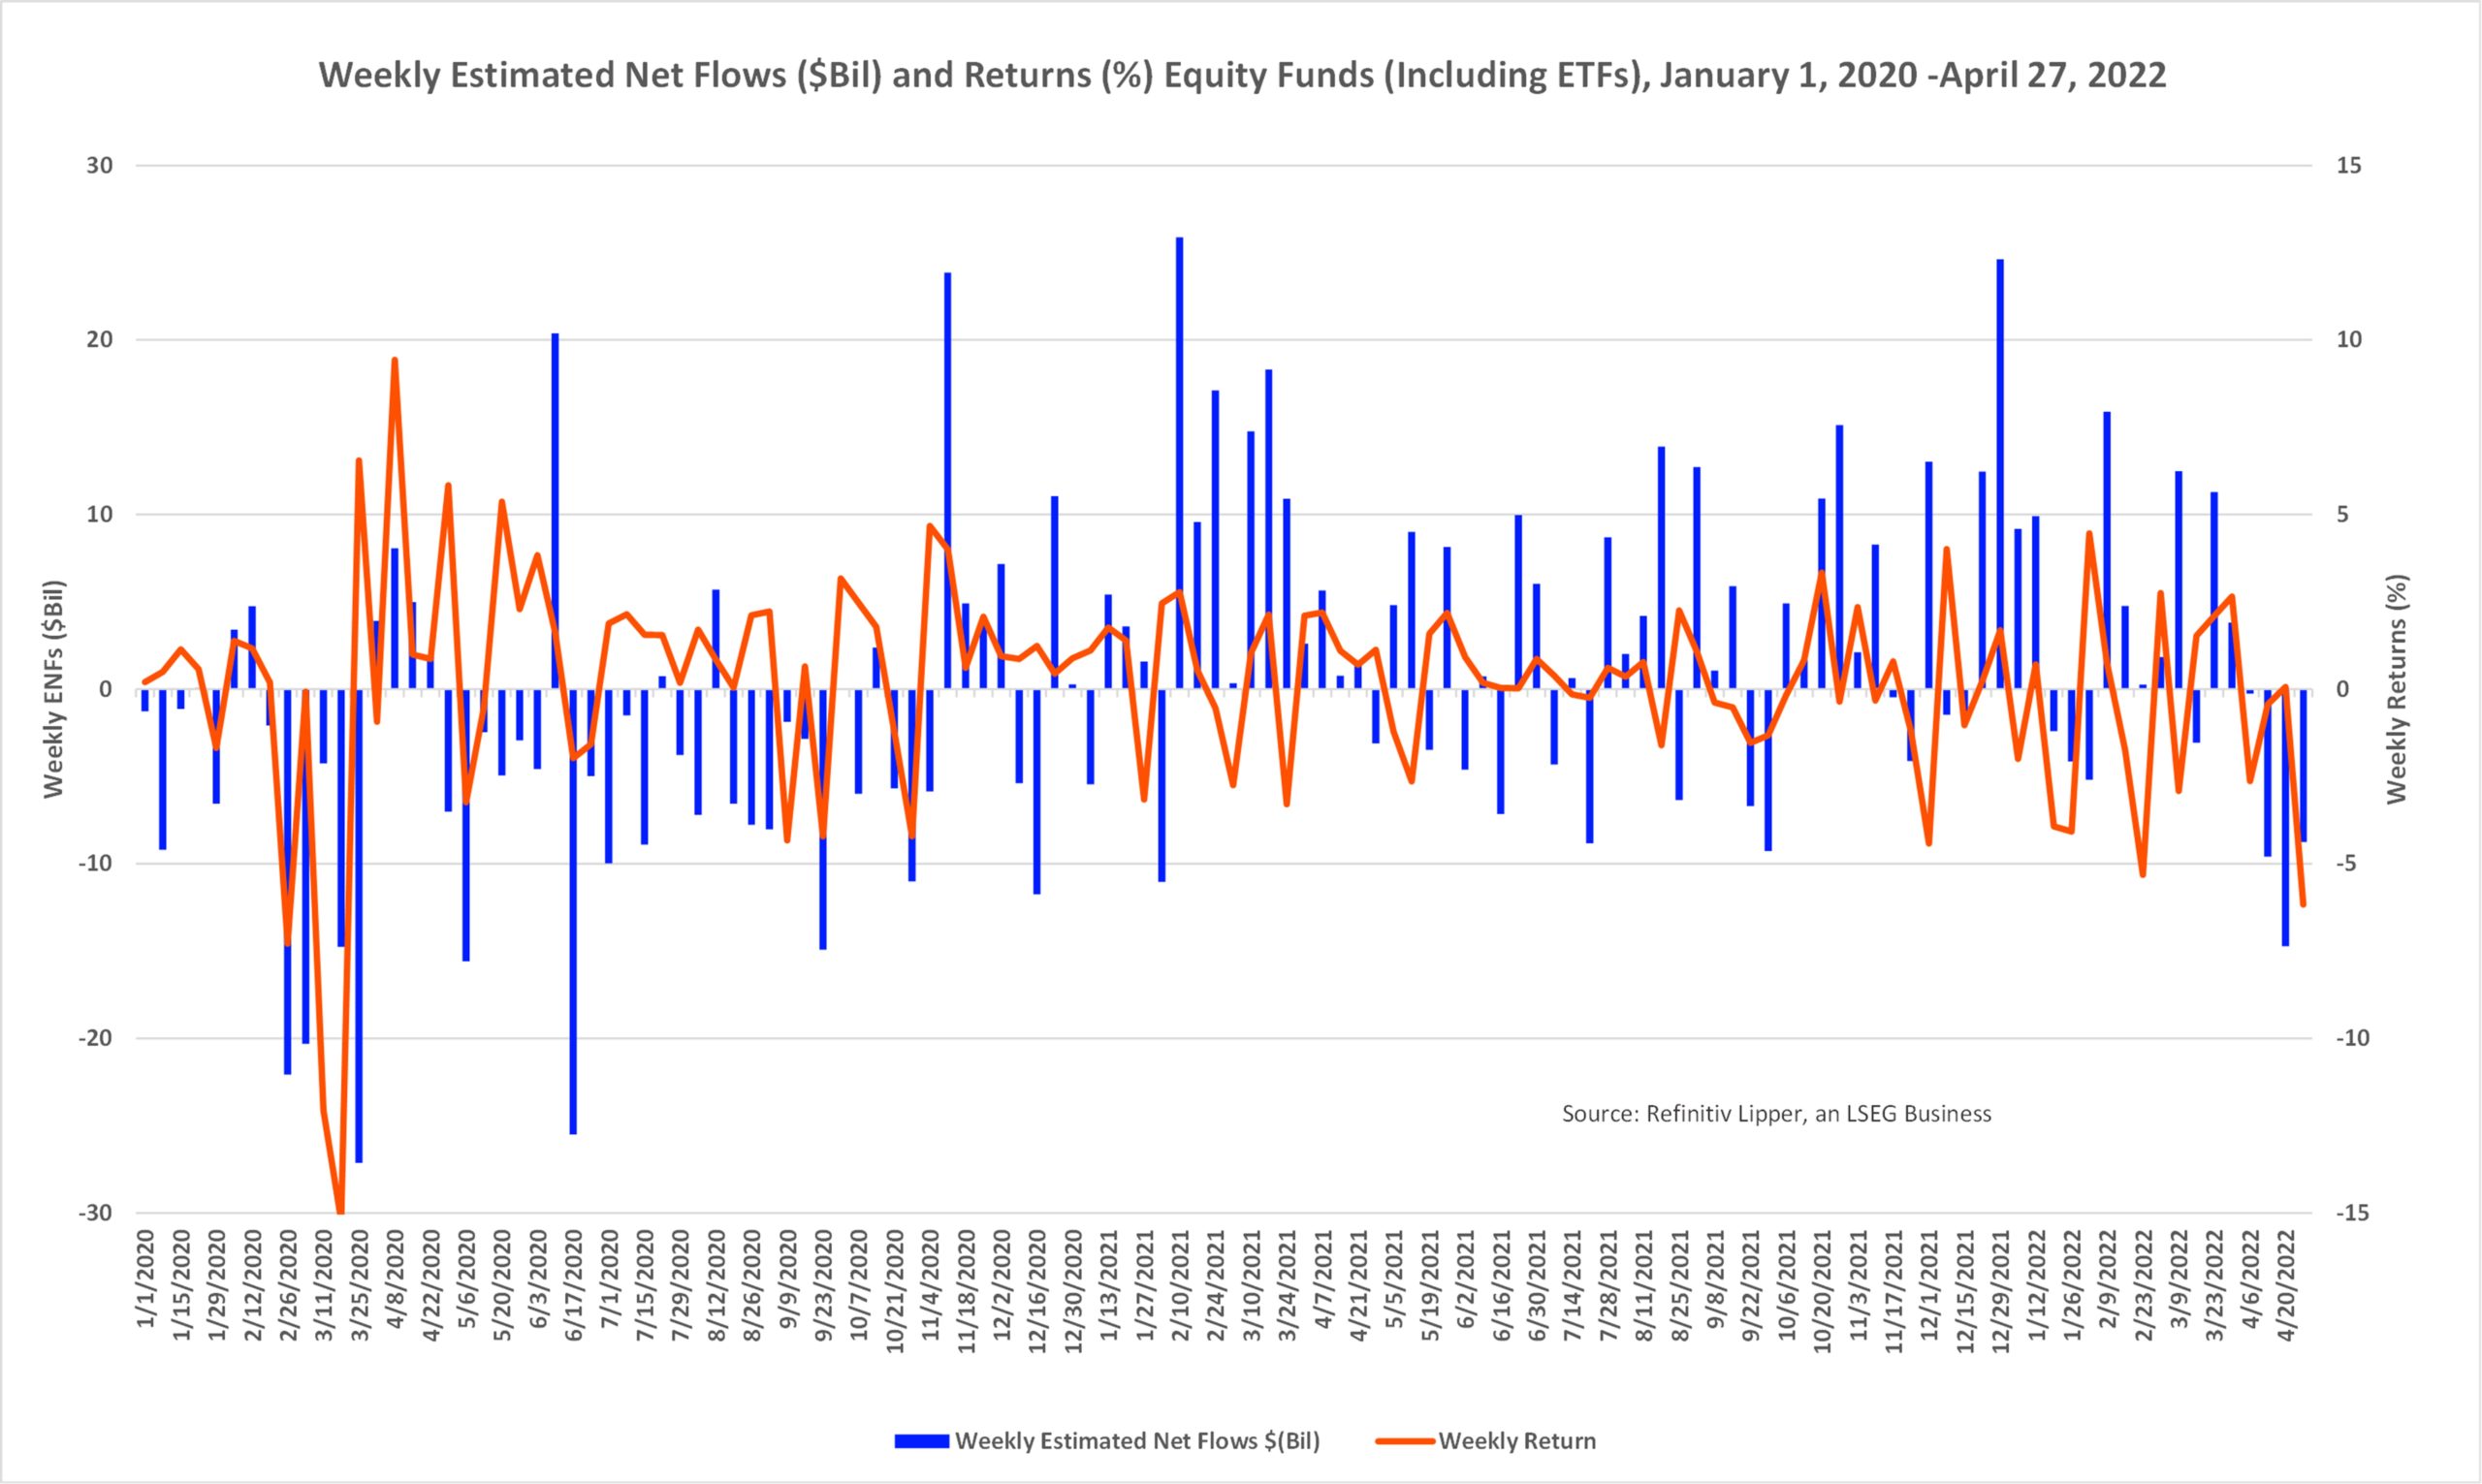 Weekly ENFs and Returns Equity Funds 2020